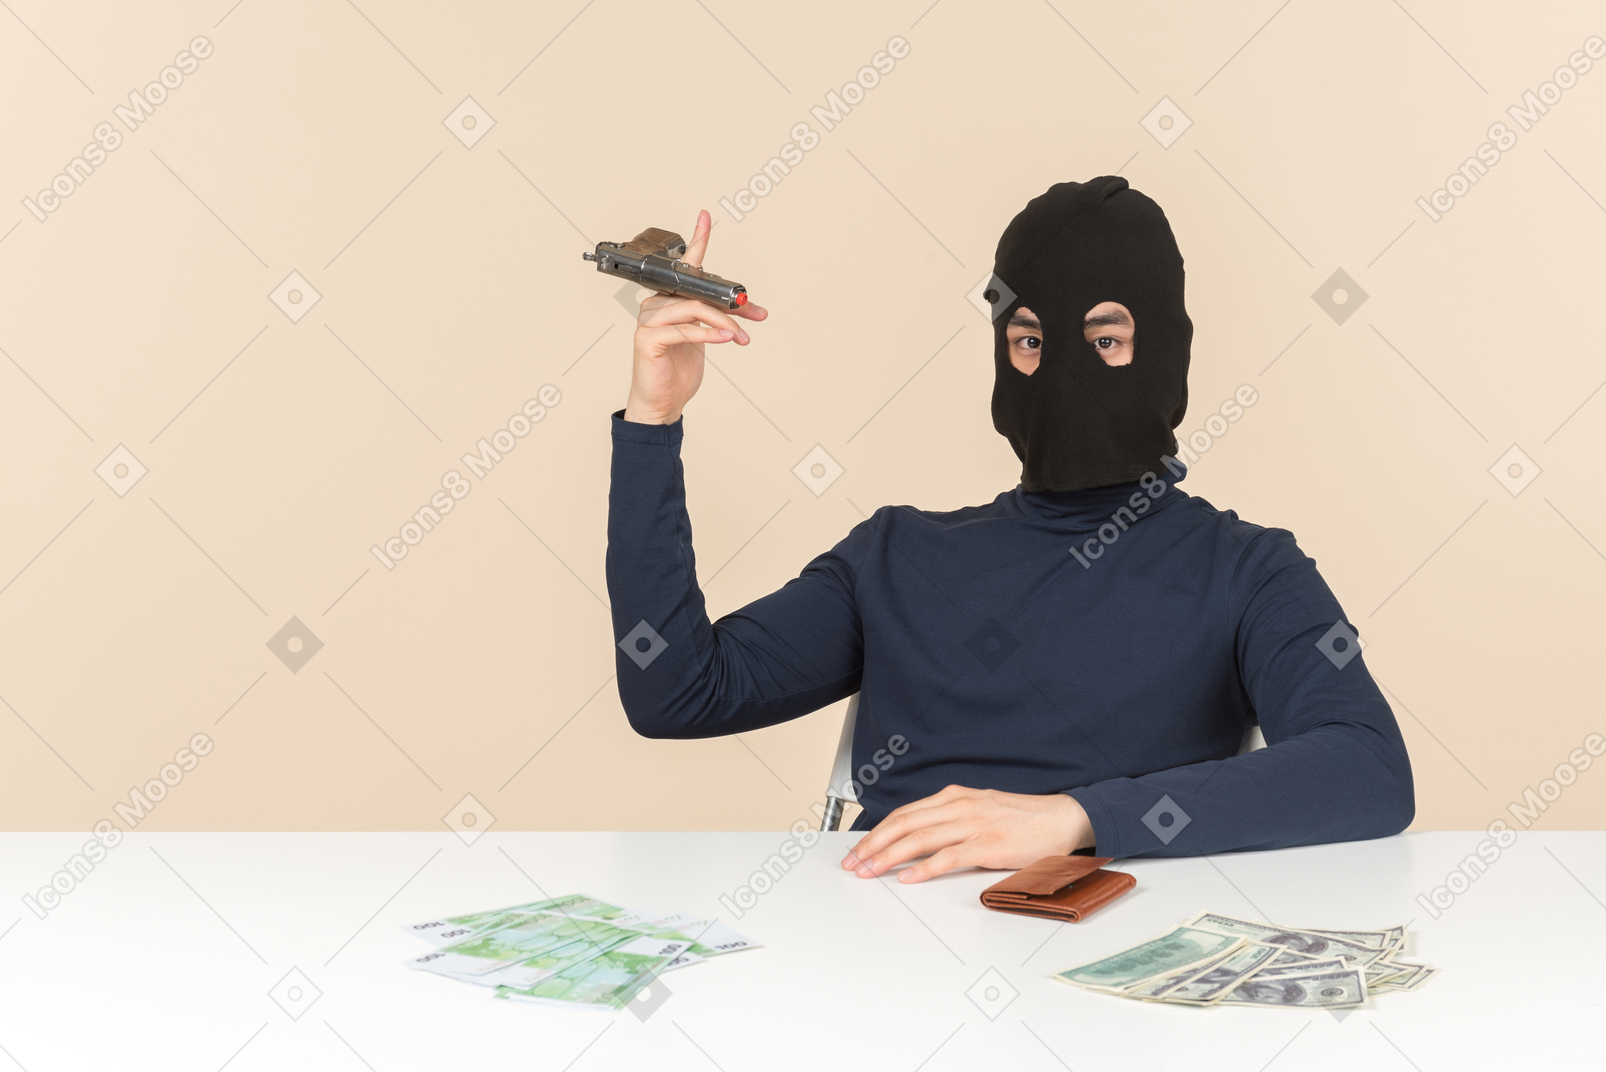 Hacker in balaclava sitting at the table with money bills on it and playing with a gun